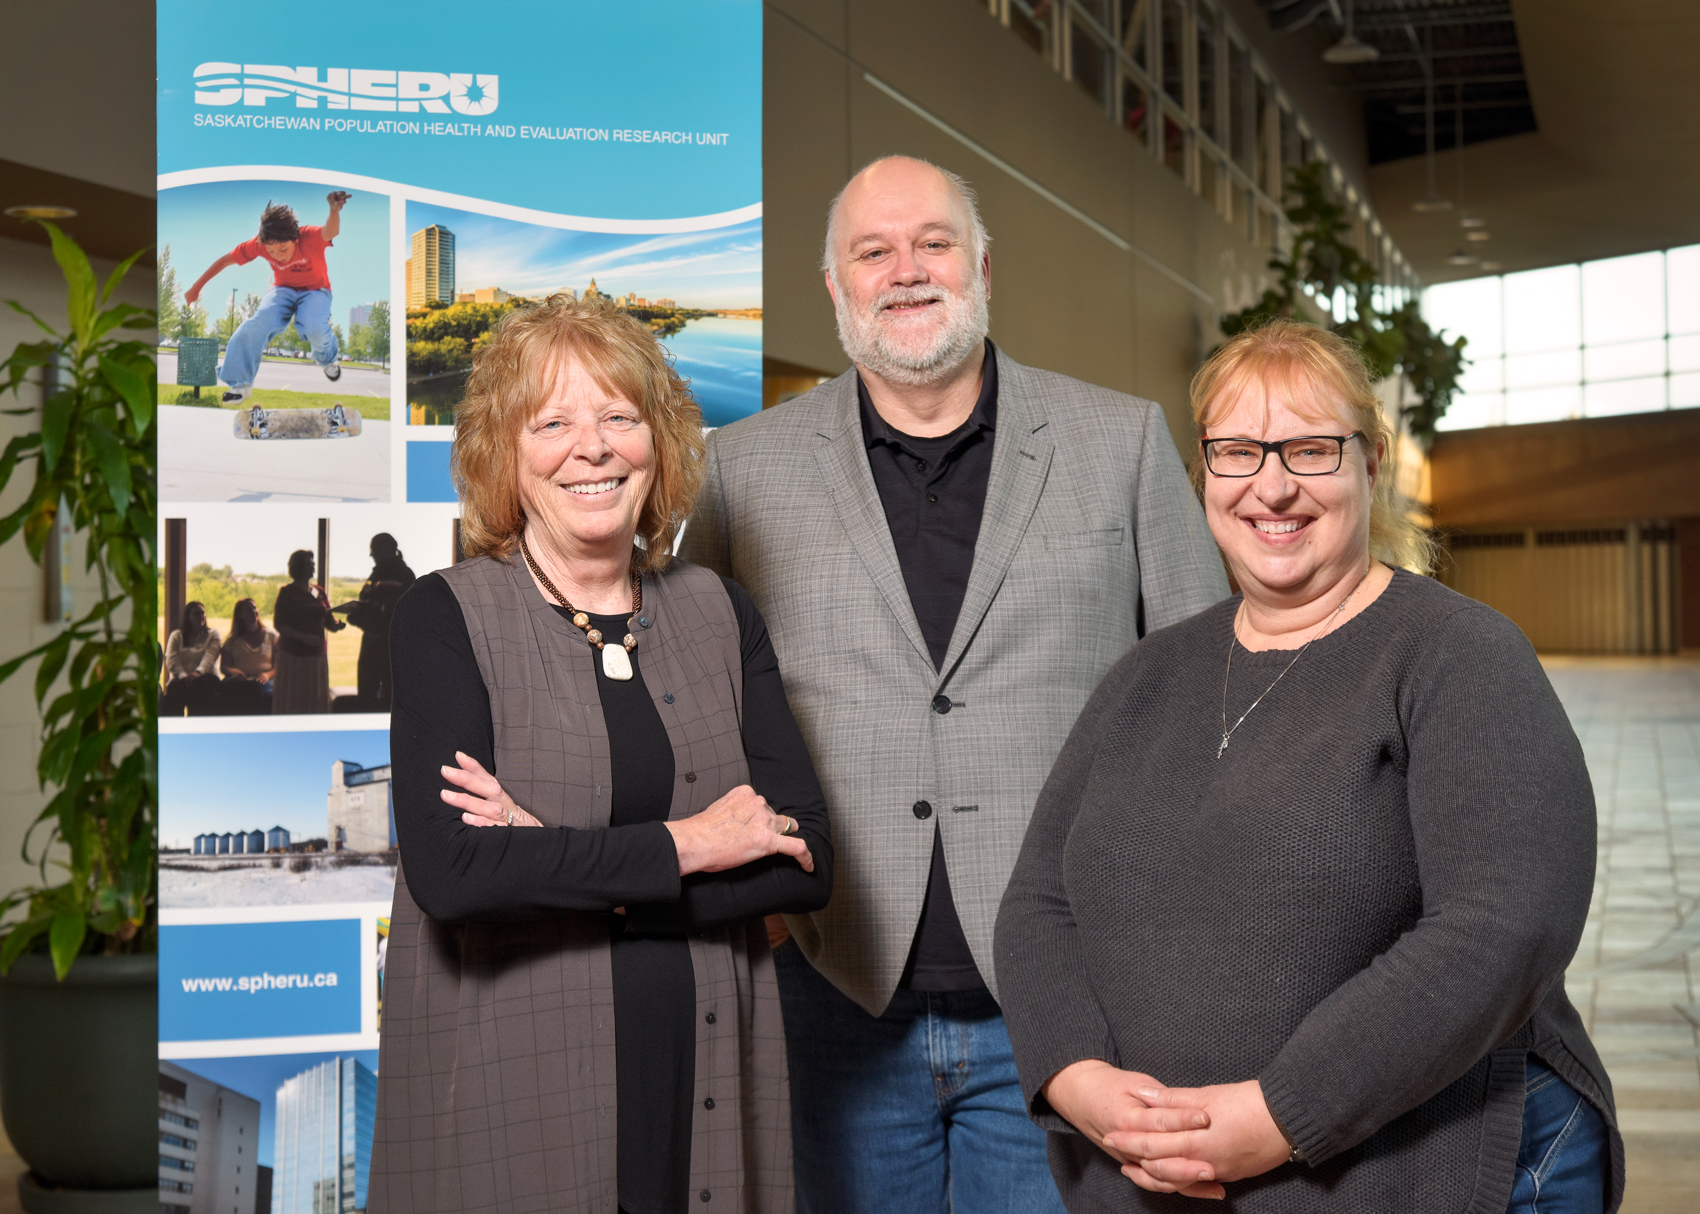 (from left) Dr. Bonnie Jeffery, Dr. Tom McIntosh, and Dr. Nuelle Novik, researchers with SPHERU, received $3 million in federal funding for their dementia-focused research projects. (Photo by Trevor Hopkin)